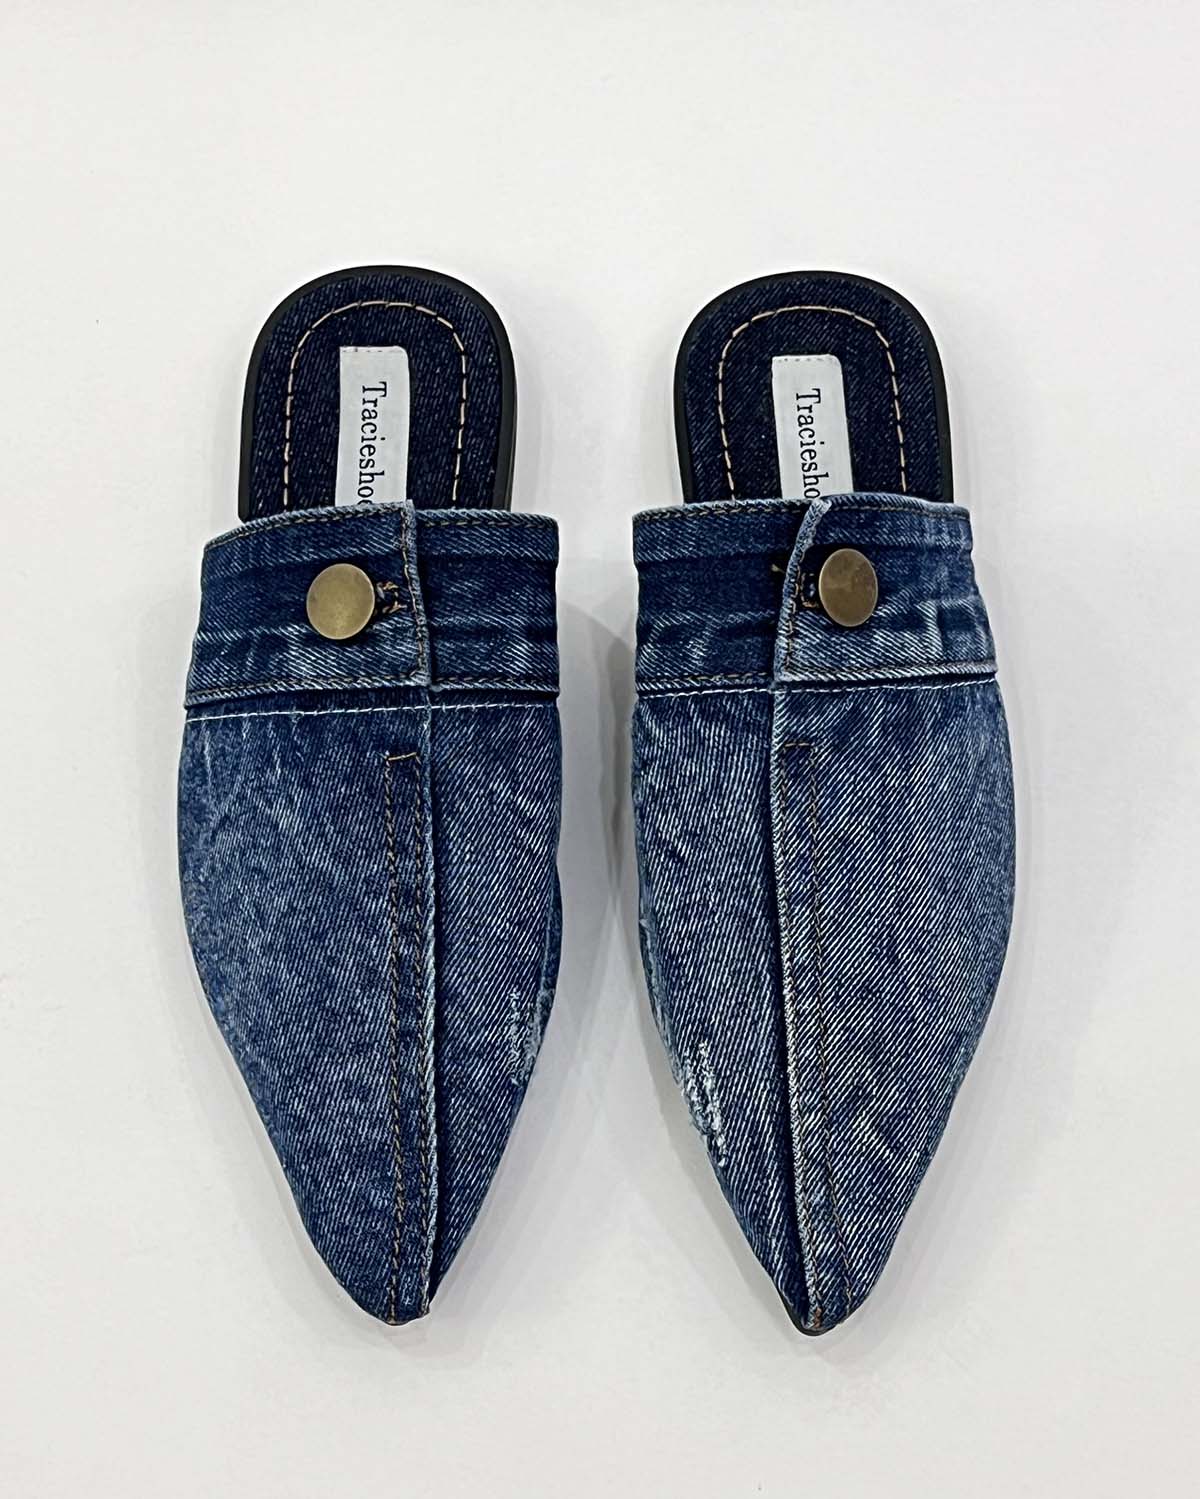 Denim pointed toe flat slippers mule shoes